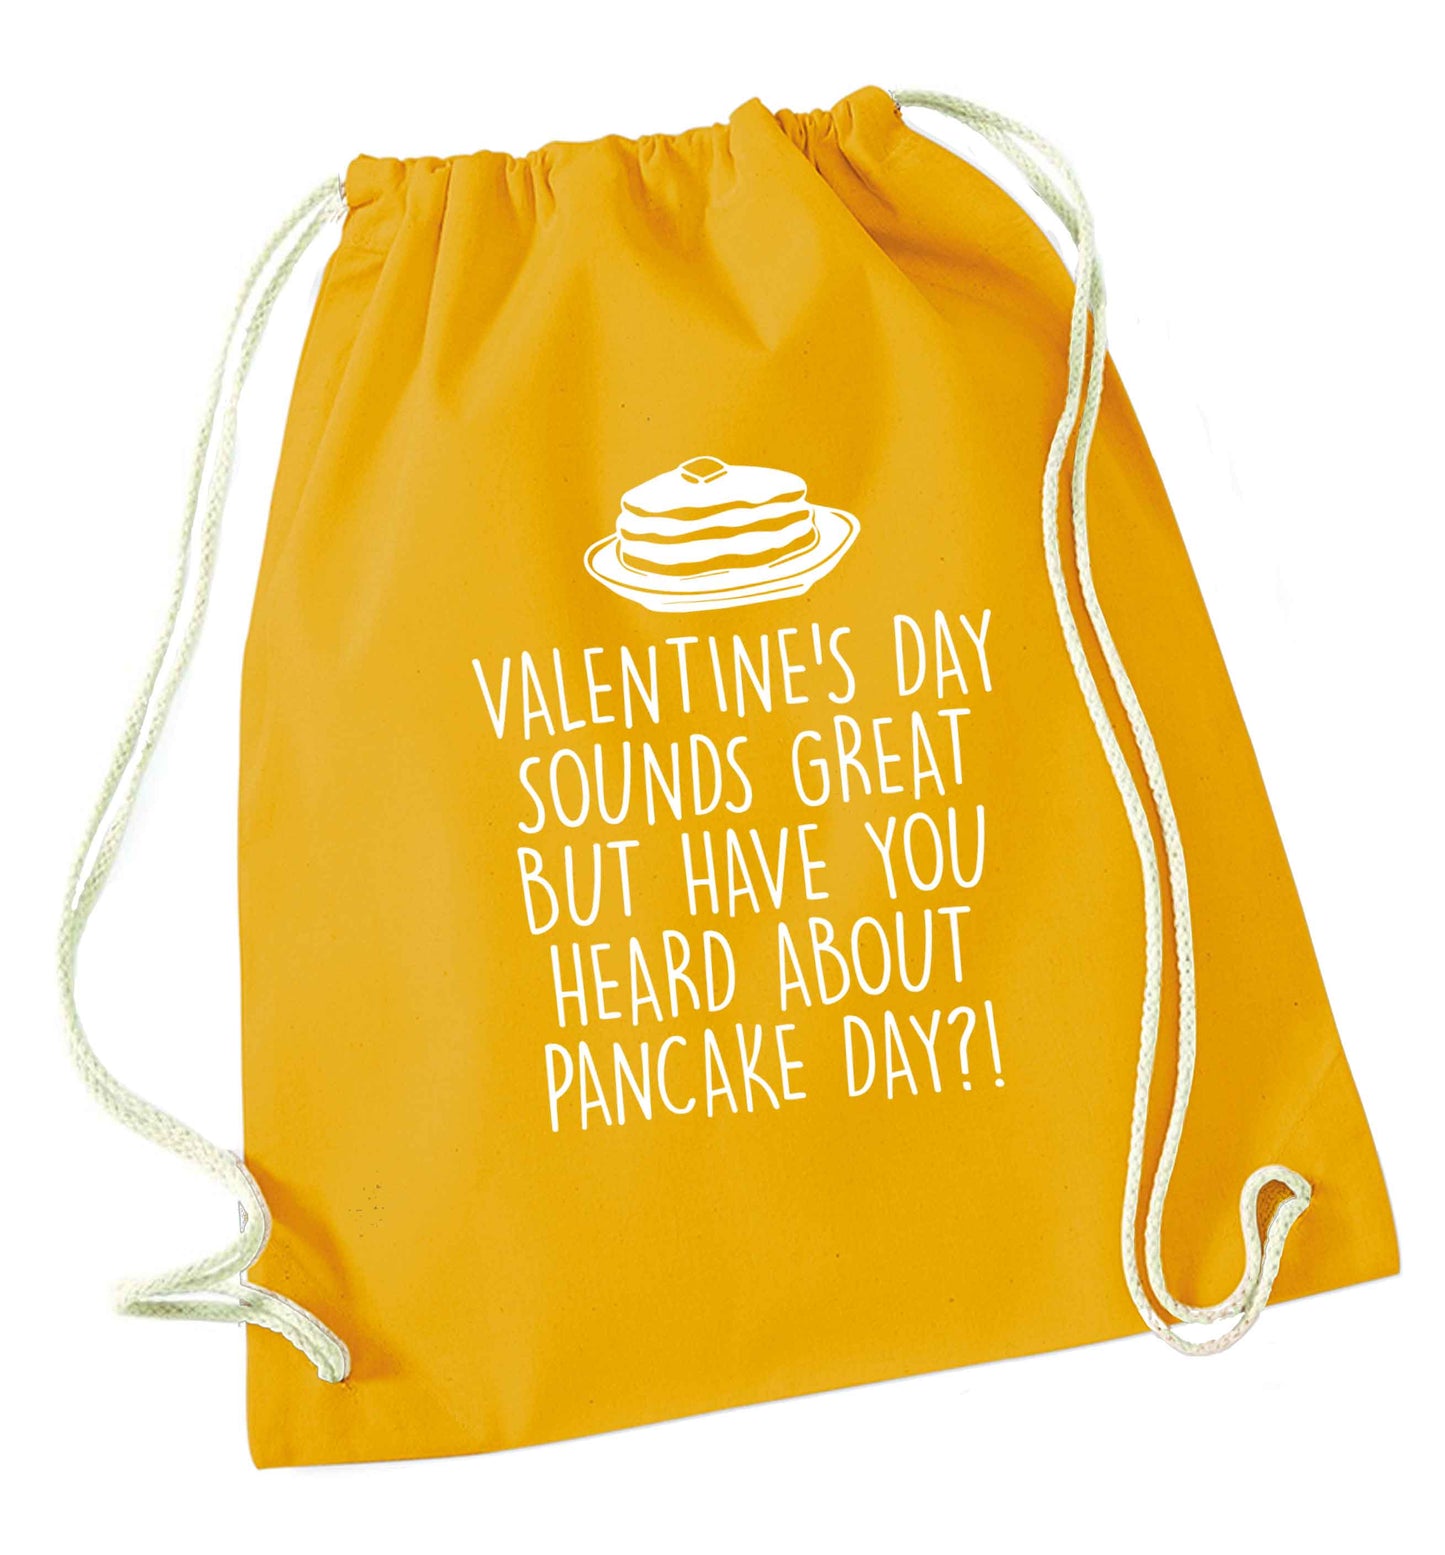 Valentine's day sounds great but have you heard about pancake day?! mustard drawstring bag